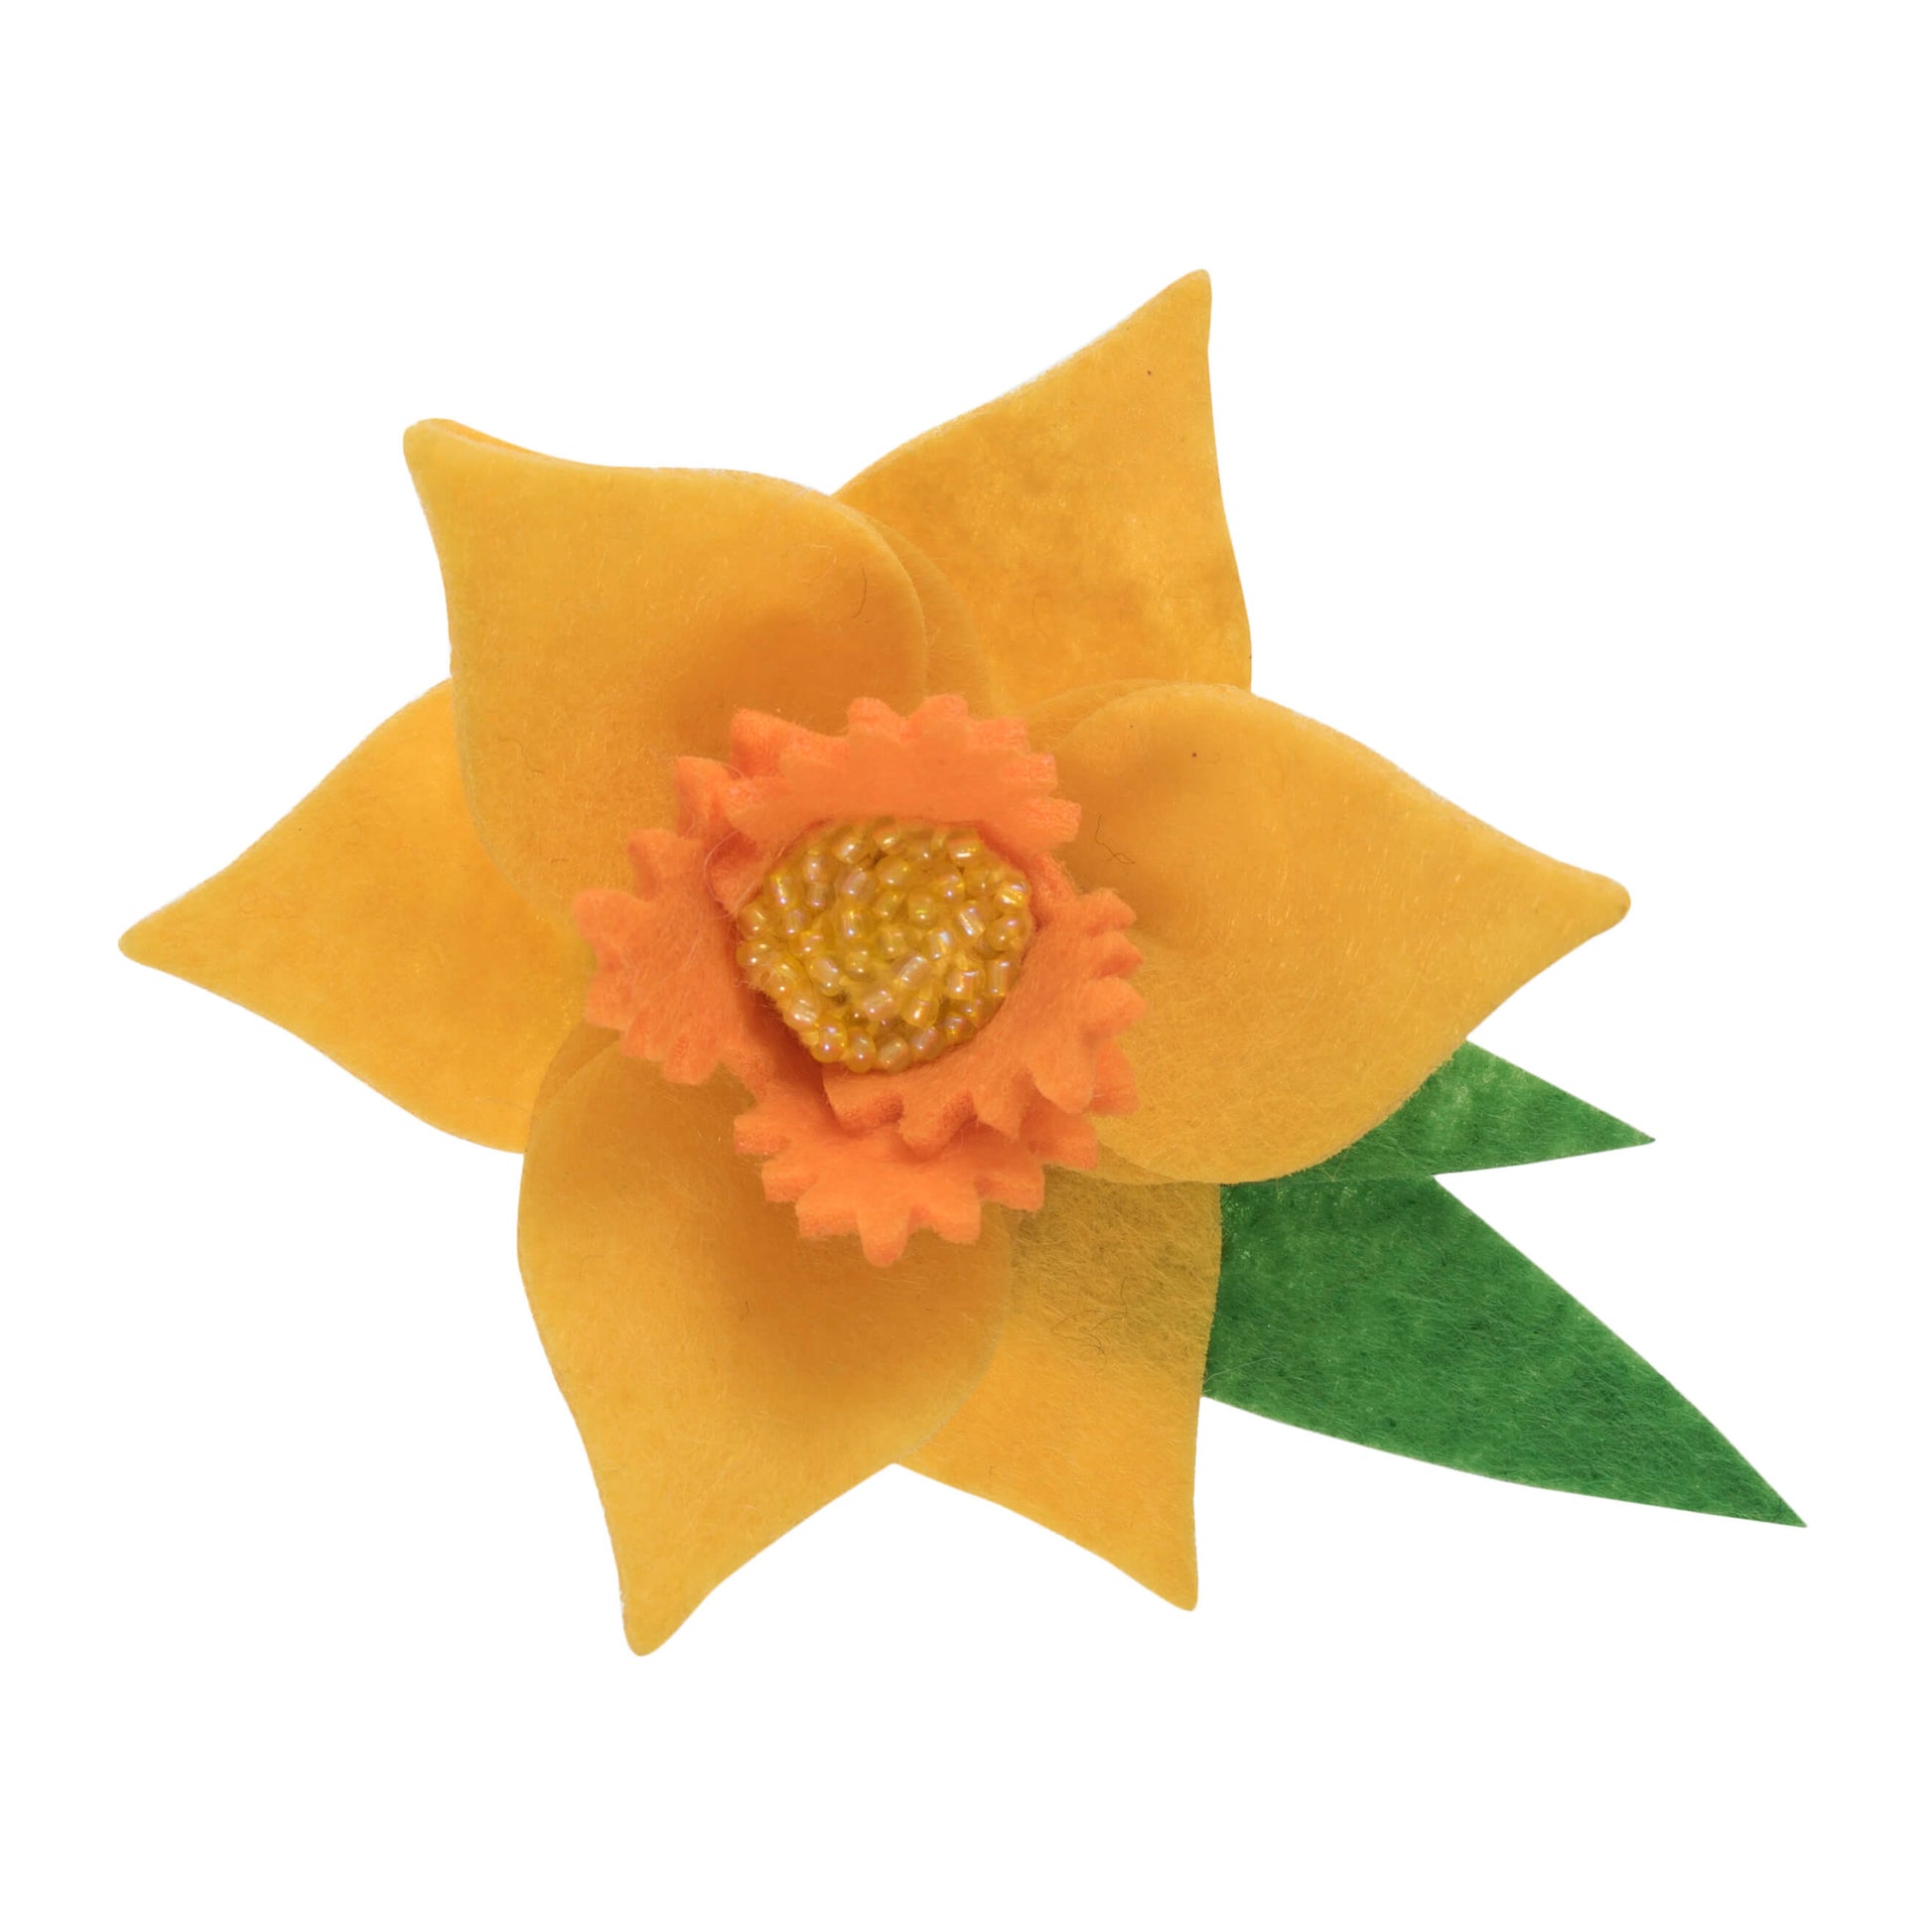 The image shows a yellow daffodil with a green leaf on a white background.